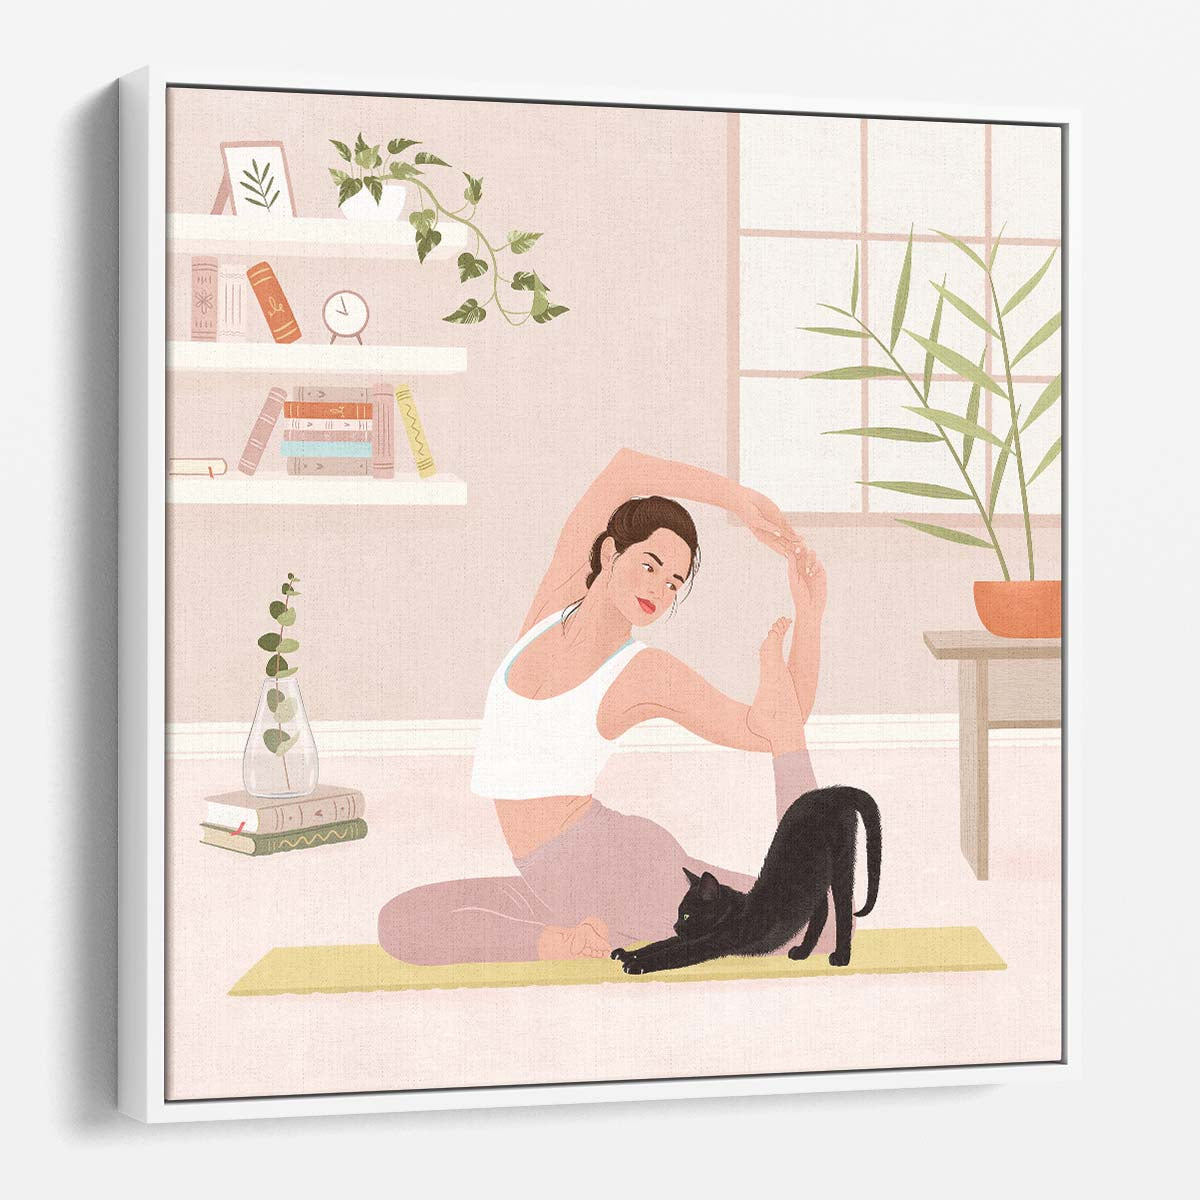 Cat and Plants Mindful Yoga Pose Illustration Wall Art by Luxuriance Designs. Made in USA.